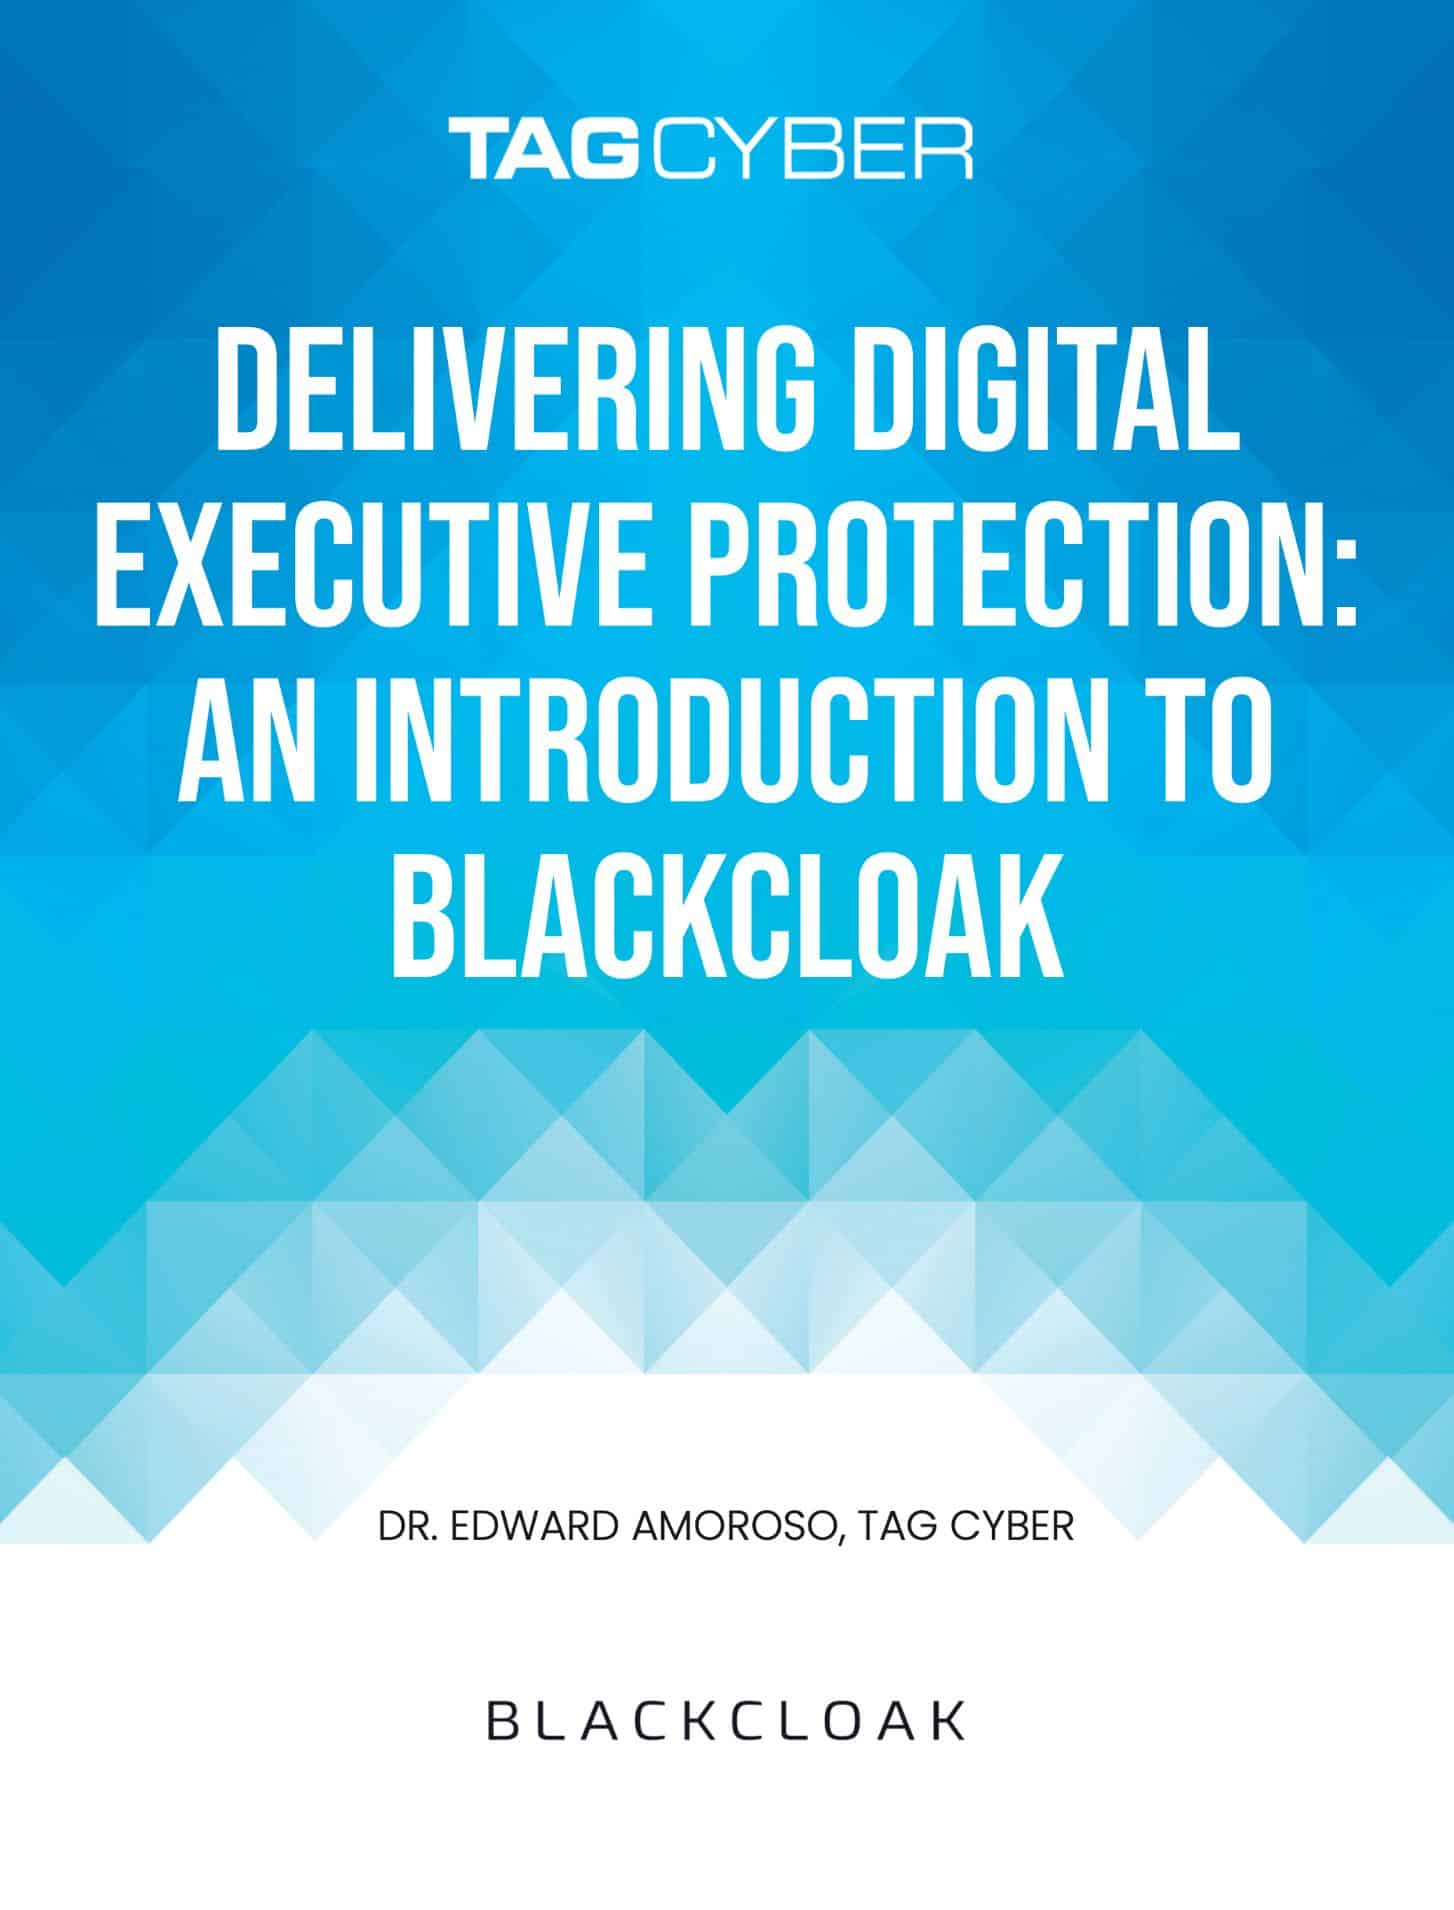 Text: TAGCYBER delivering digital executive protection: An introduction to BlackCloak